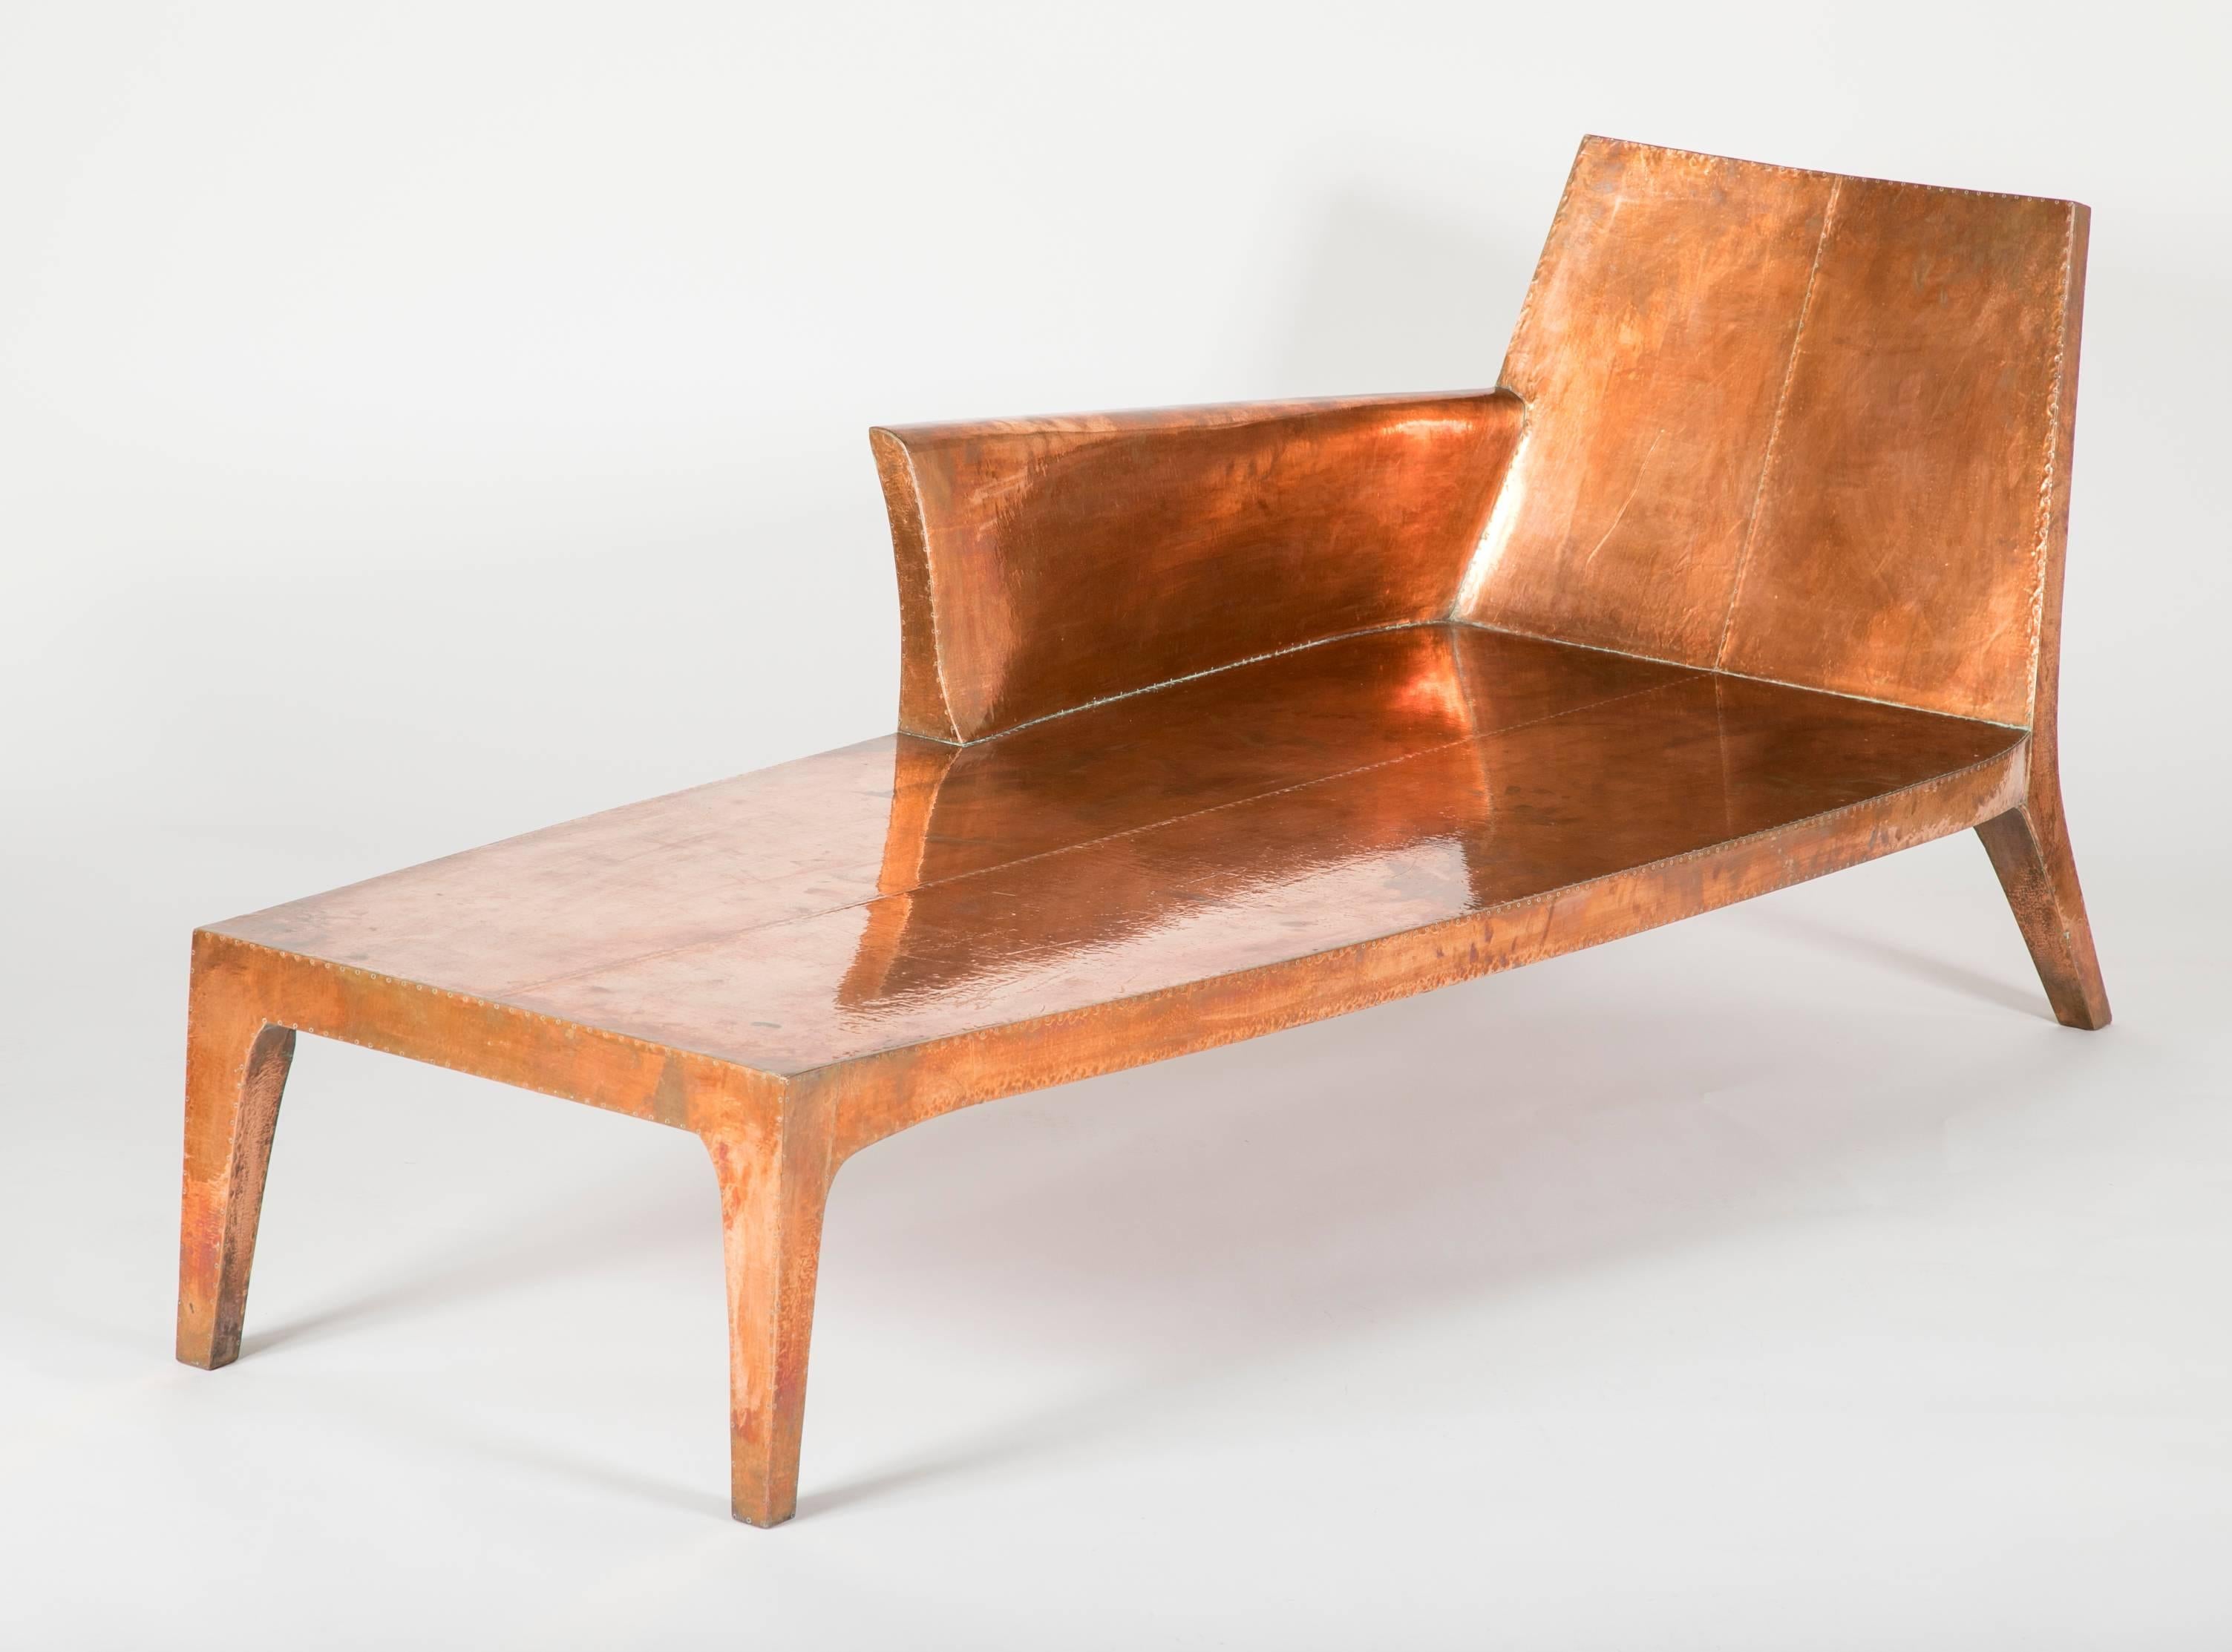 Louise chaise designed by Paul Mathieu for Stephanie Odegard Co. Ltd.  .
Hand-carved teak wood frame clad in copper with nailhead details.